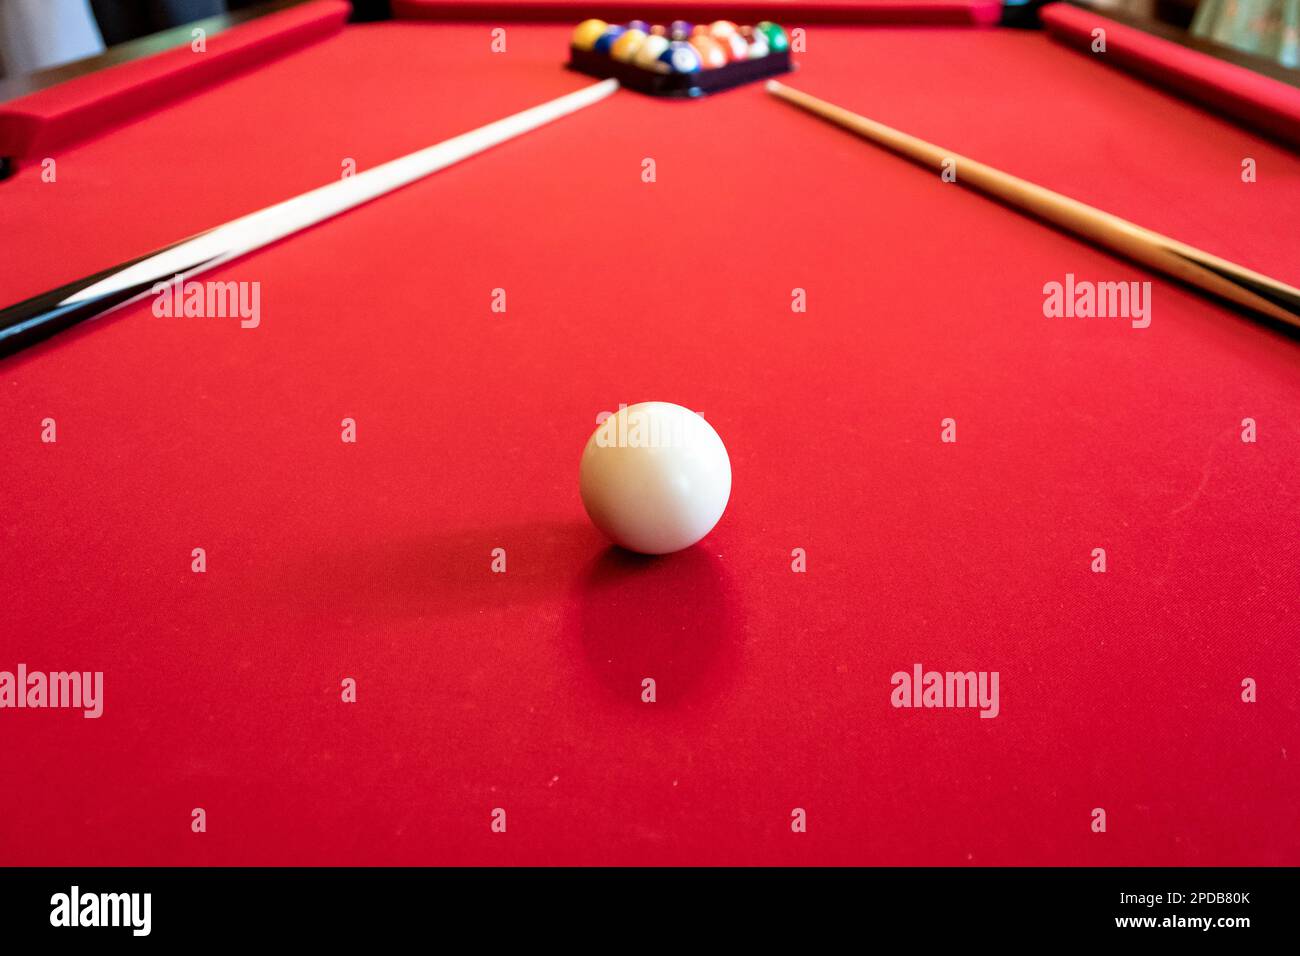 Red billiard table with billiard balls and cues Stock Photo